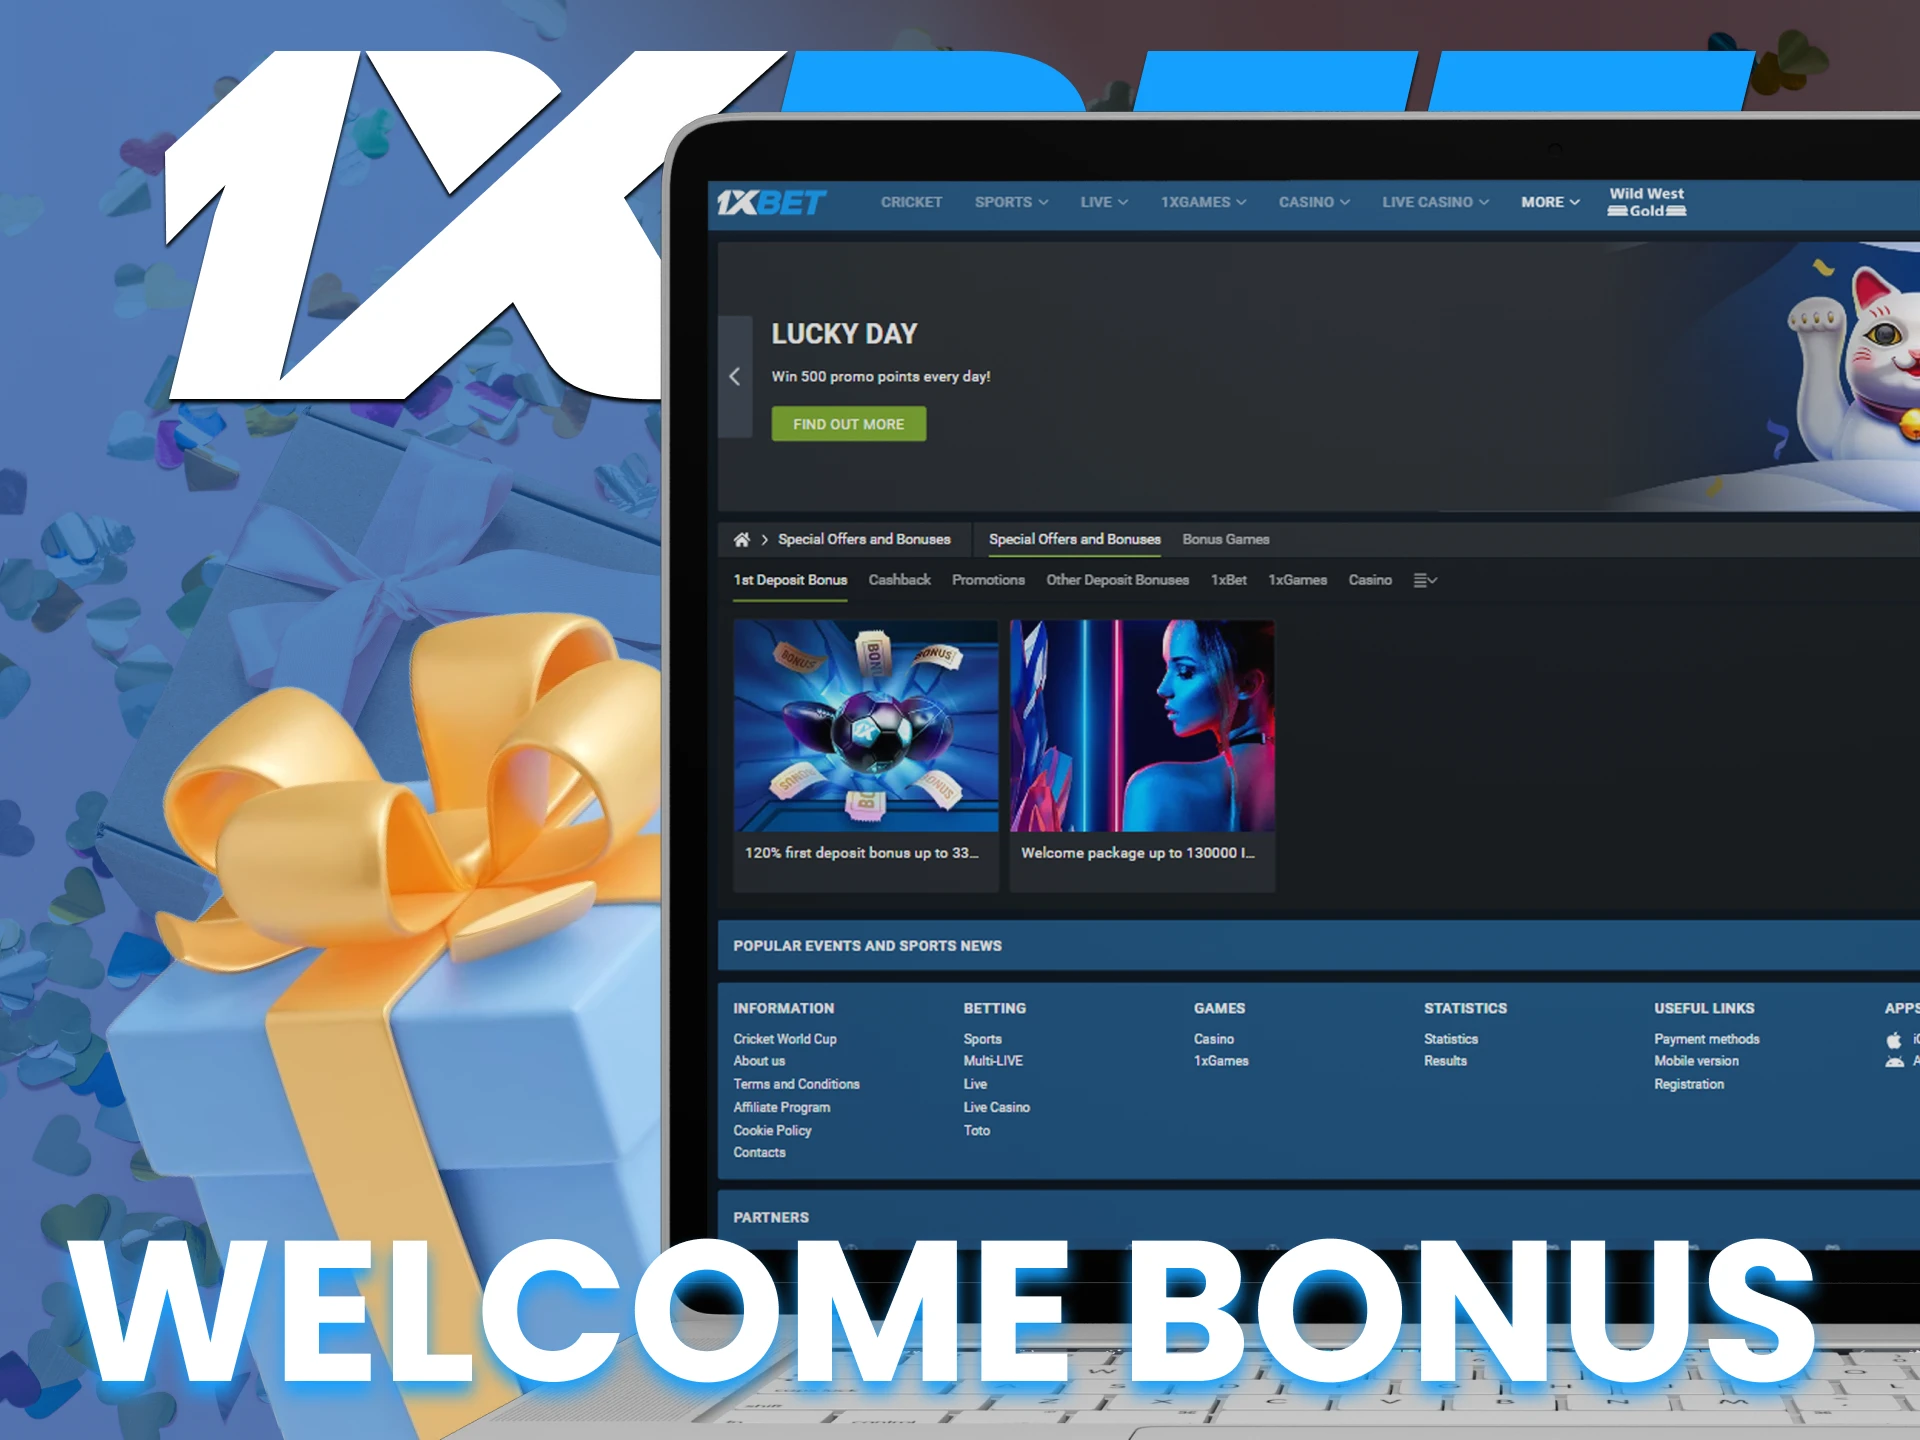 1xBet has several welcome bonuses.